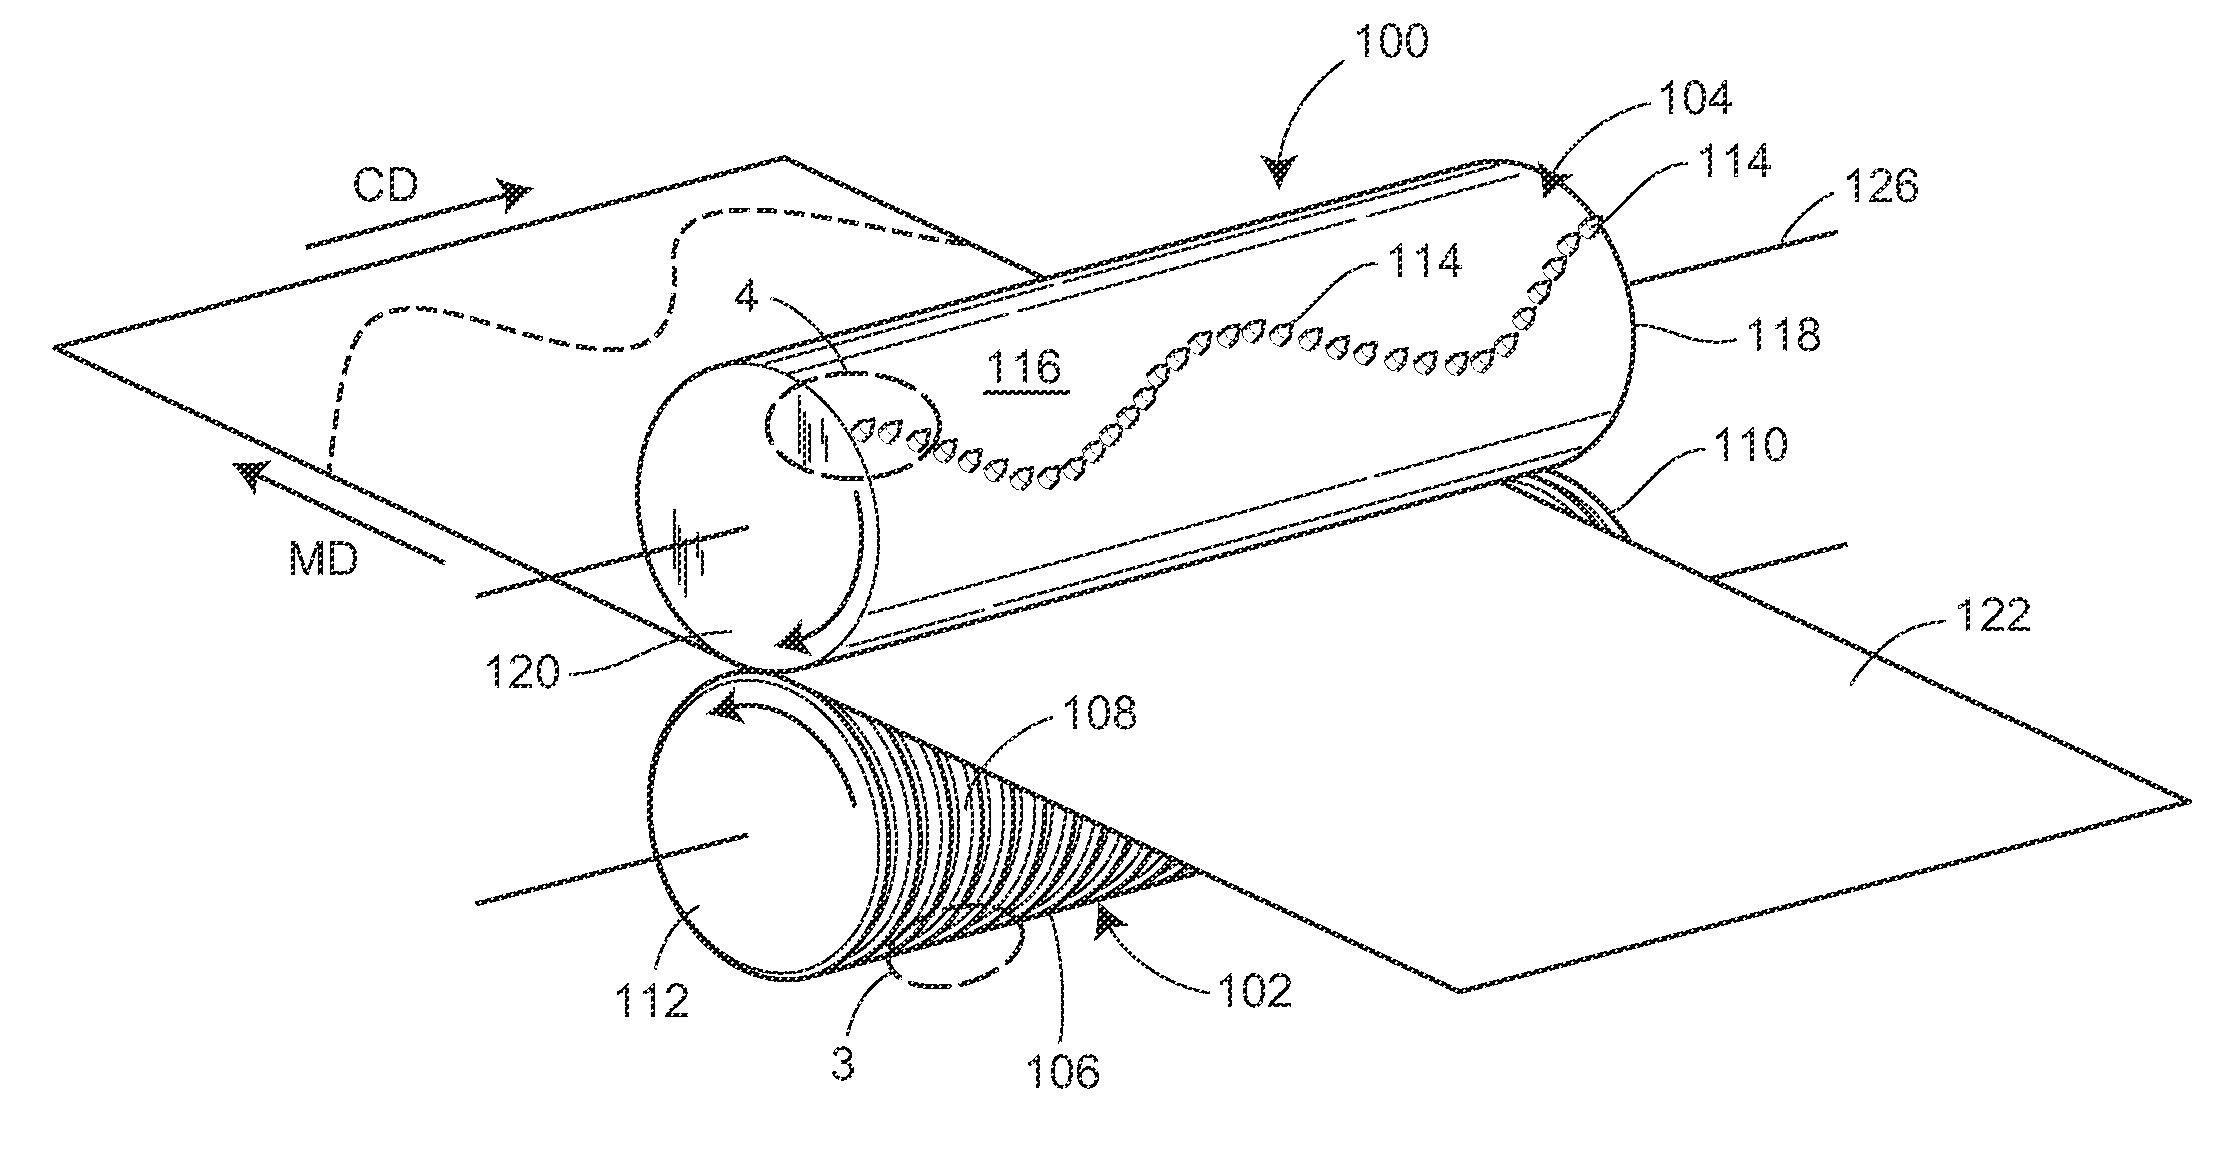 Method for providing a web with unique perforations